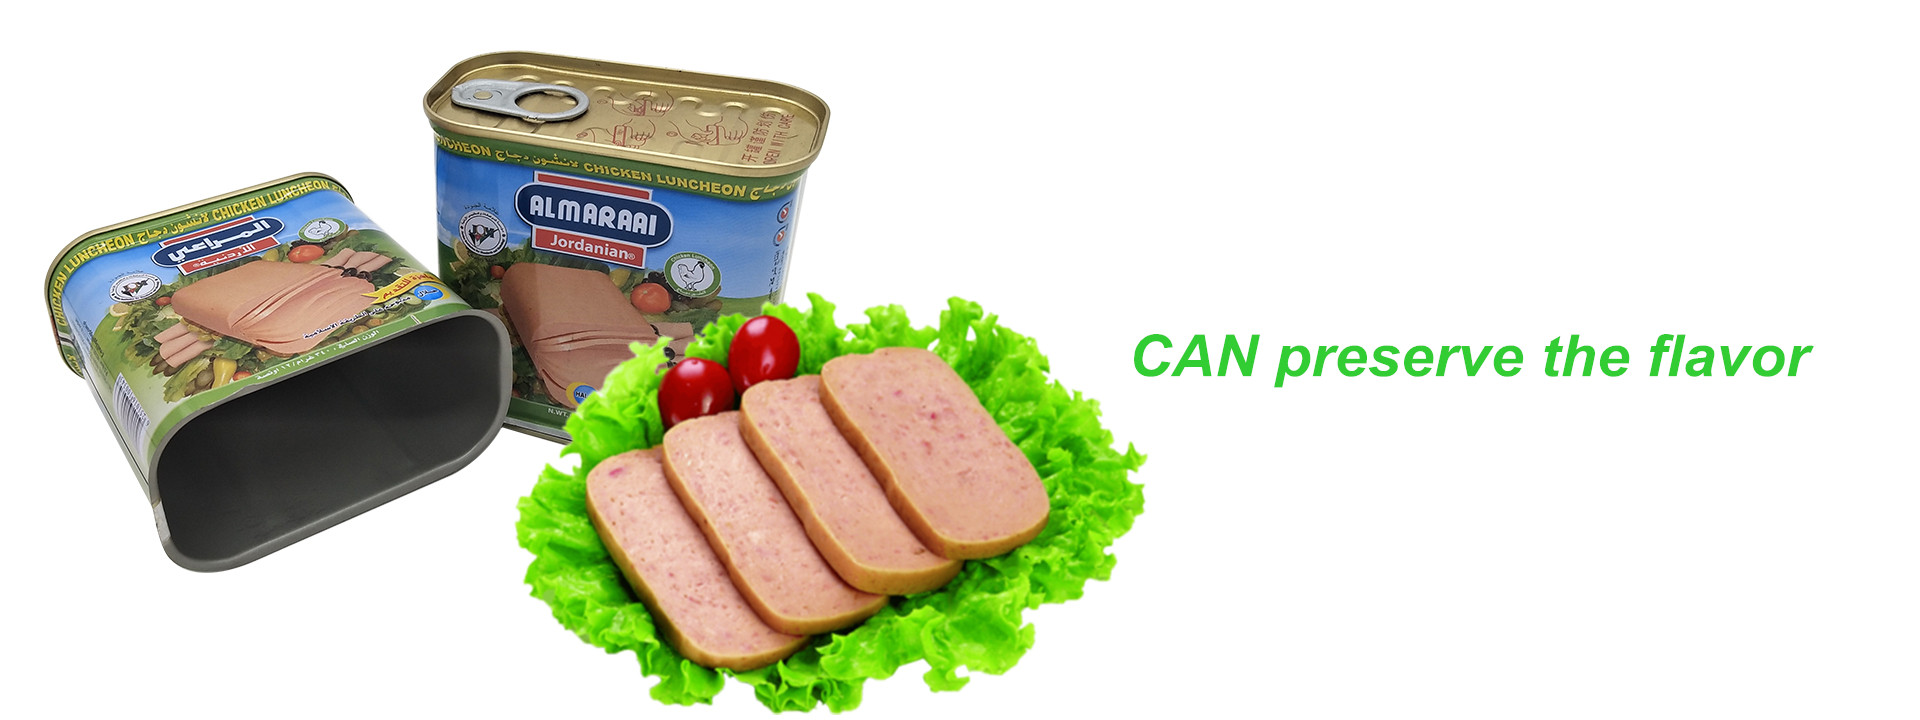 Linfeng-professional 340g rectangular luncheon meat tin can supplier and exporter in china！